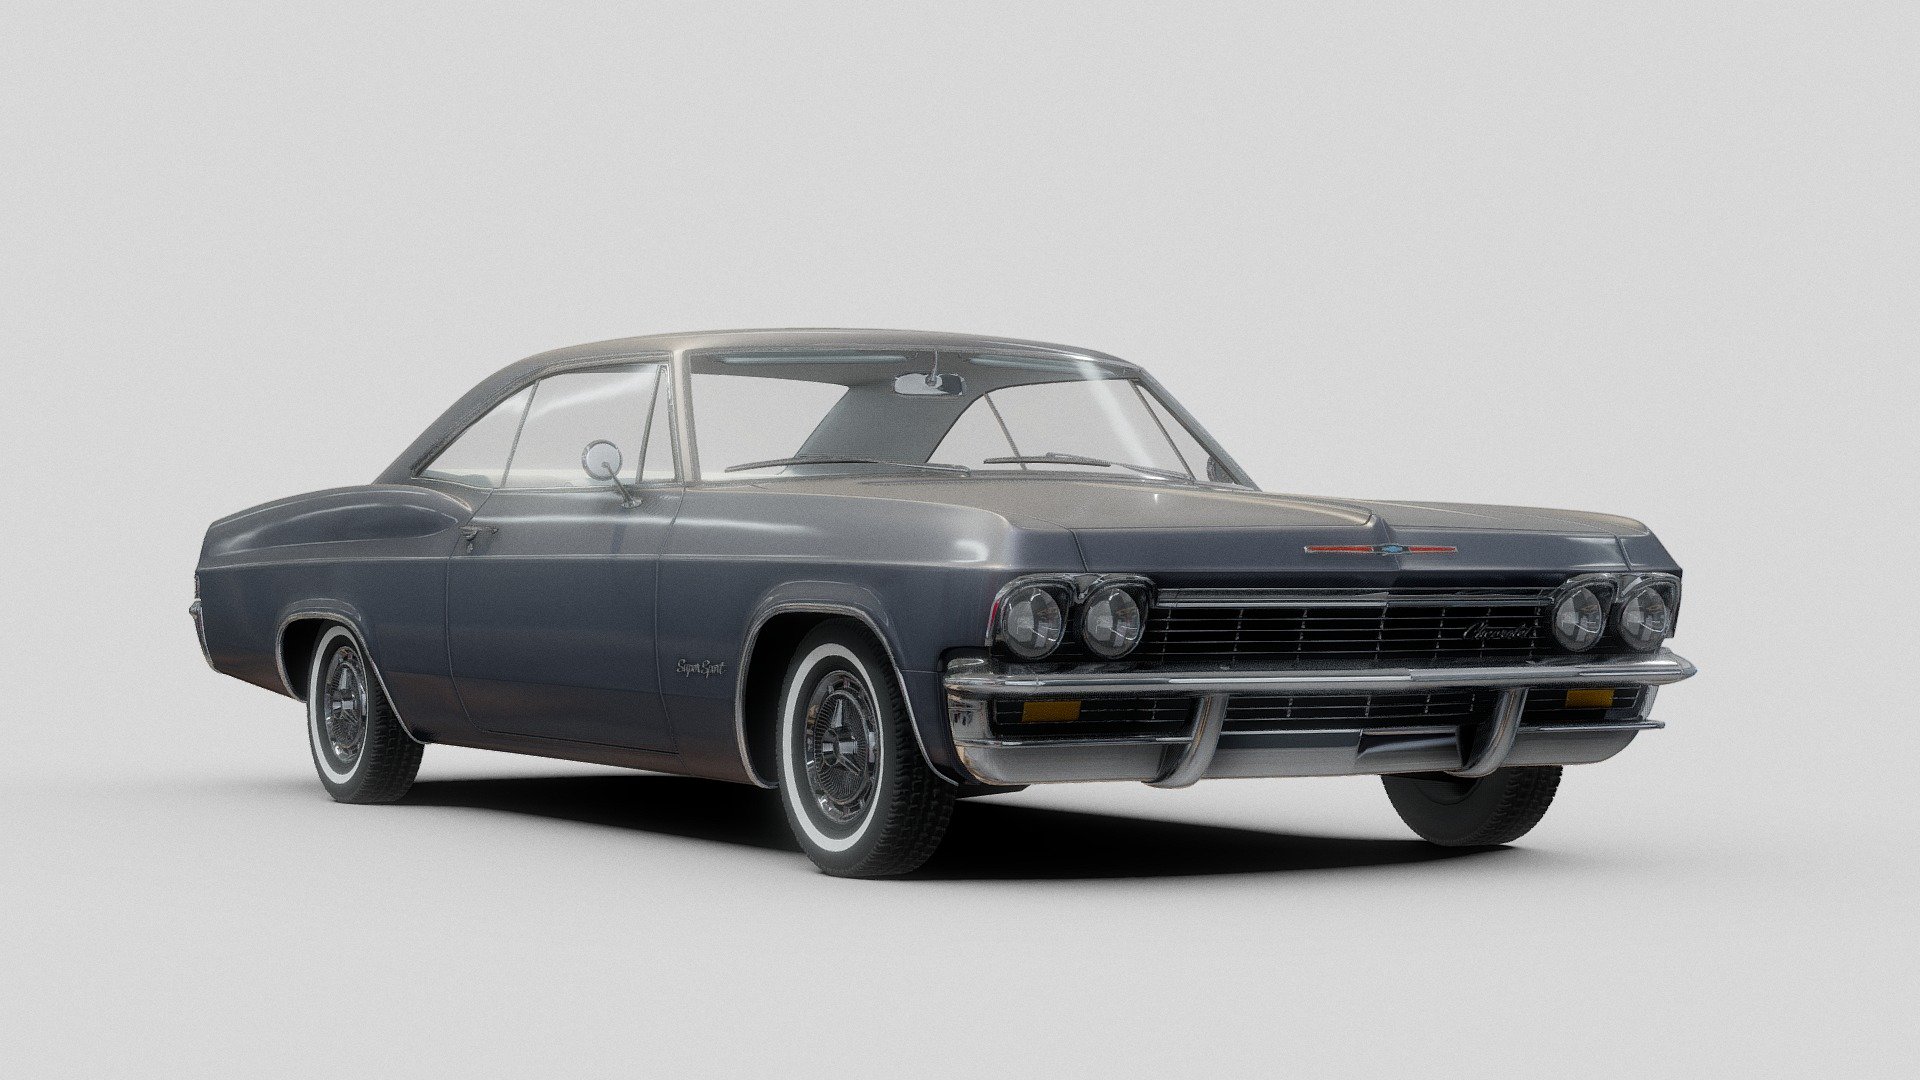 Impala 1965 ss

3d car model of an old epic amarican muscle car (Impala 1965) type ss

fully editable / rigable 

buy getting this model you have full control on meshes and materials

you can even subdivide all parts in blneder for having better looking details.

you can support me by folowing me on instagram

my ig: ZIRODESIGN - Impala 1965 ss - Buy Royalty Free 3D model by ZIRODESIGN 3d model